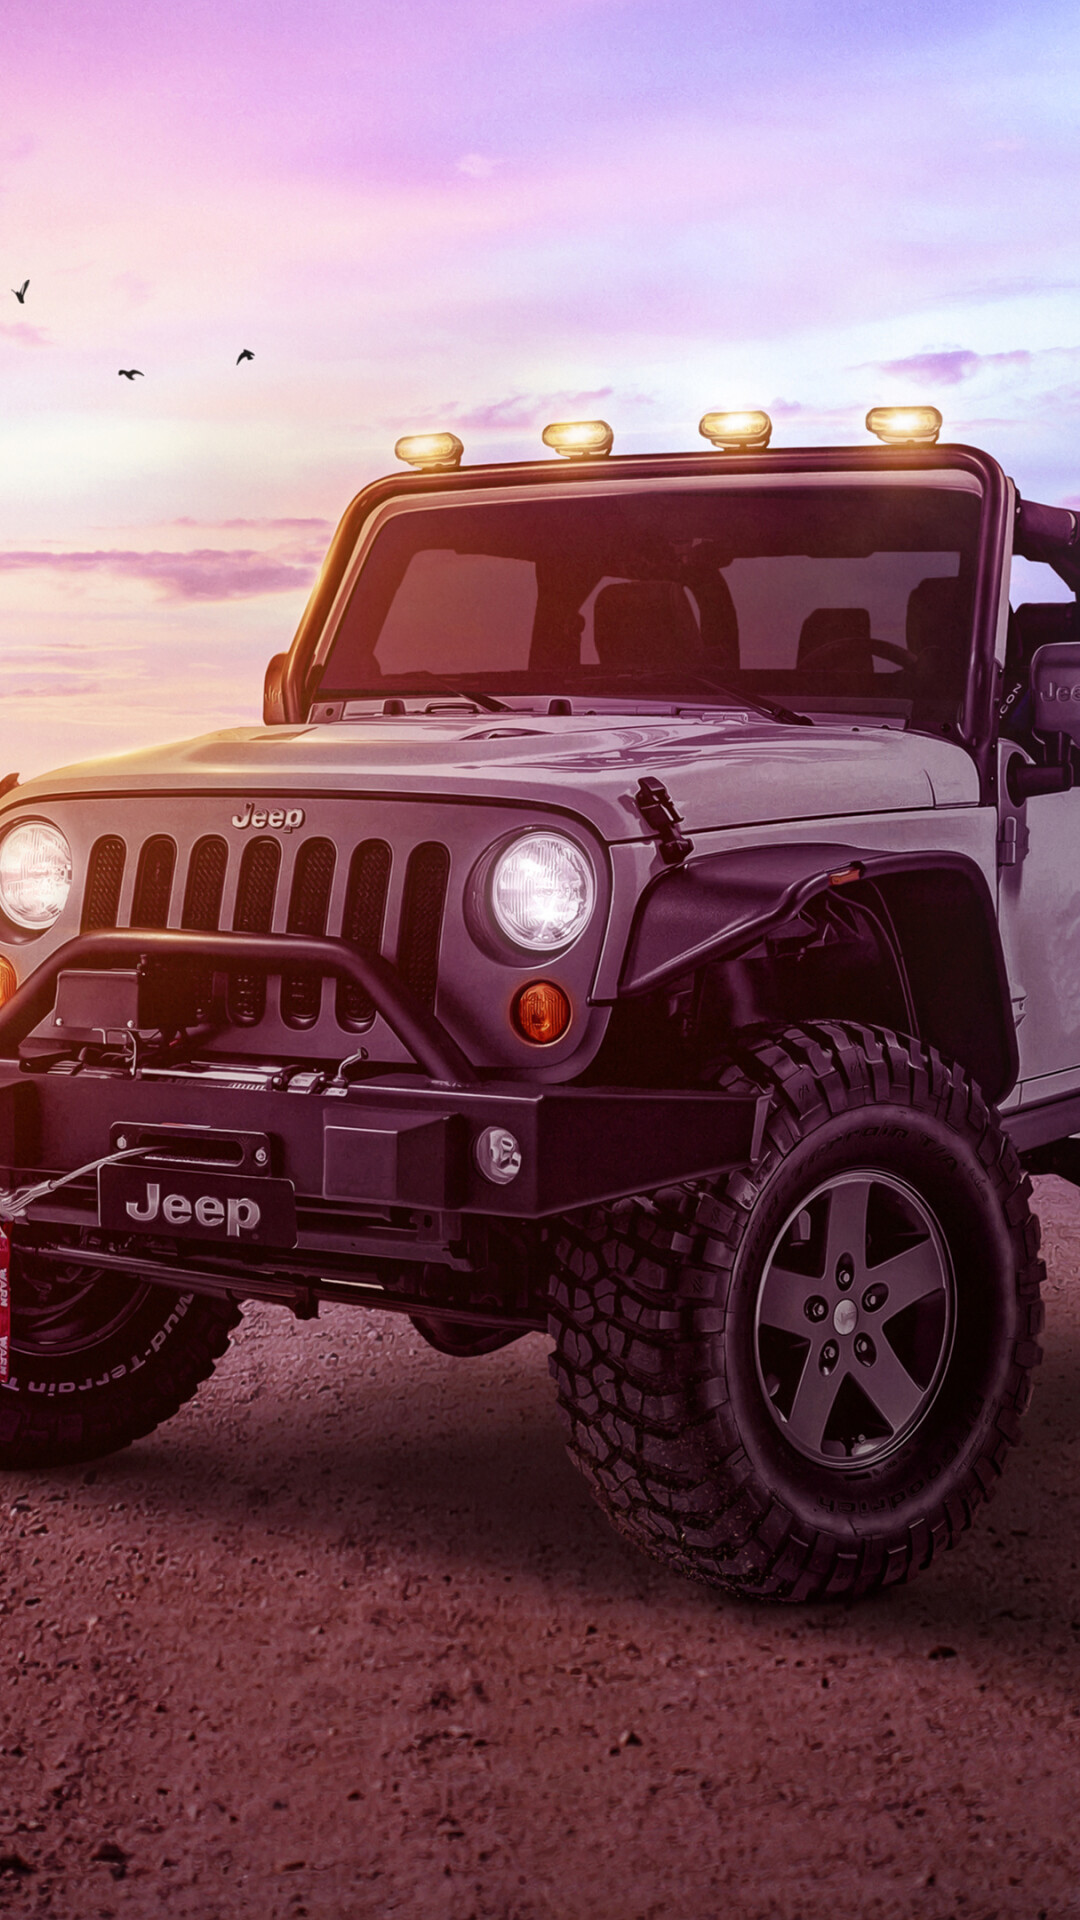 Jeep Wrangler: The third-generation of the model was released in 2006 for the 2007 model year. 1080x1920 Full HD Wallpaper.